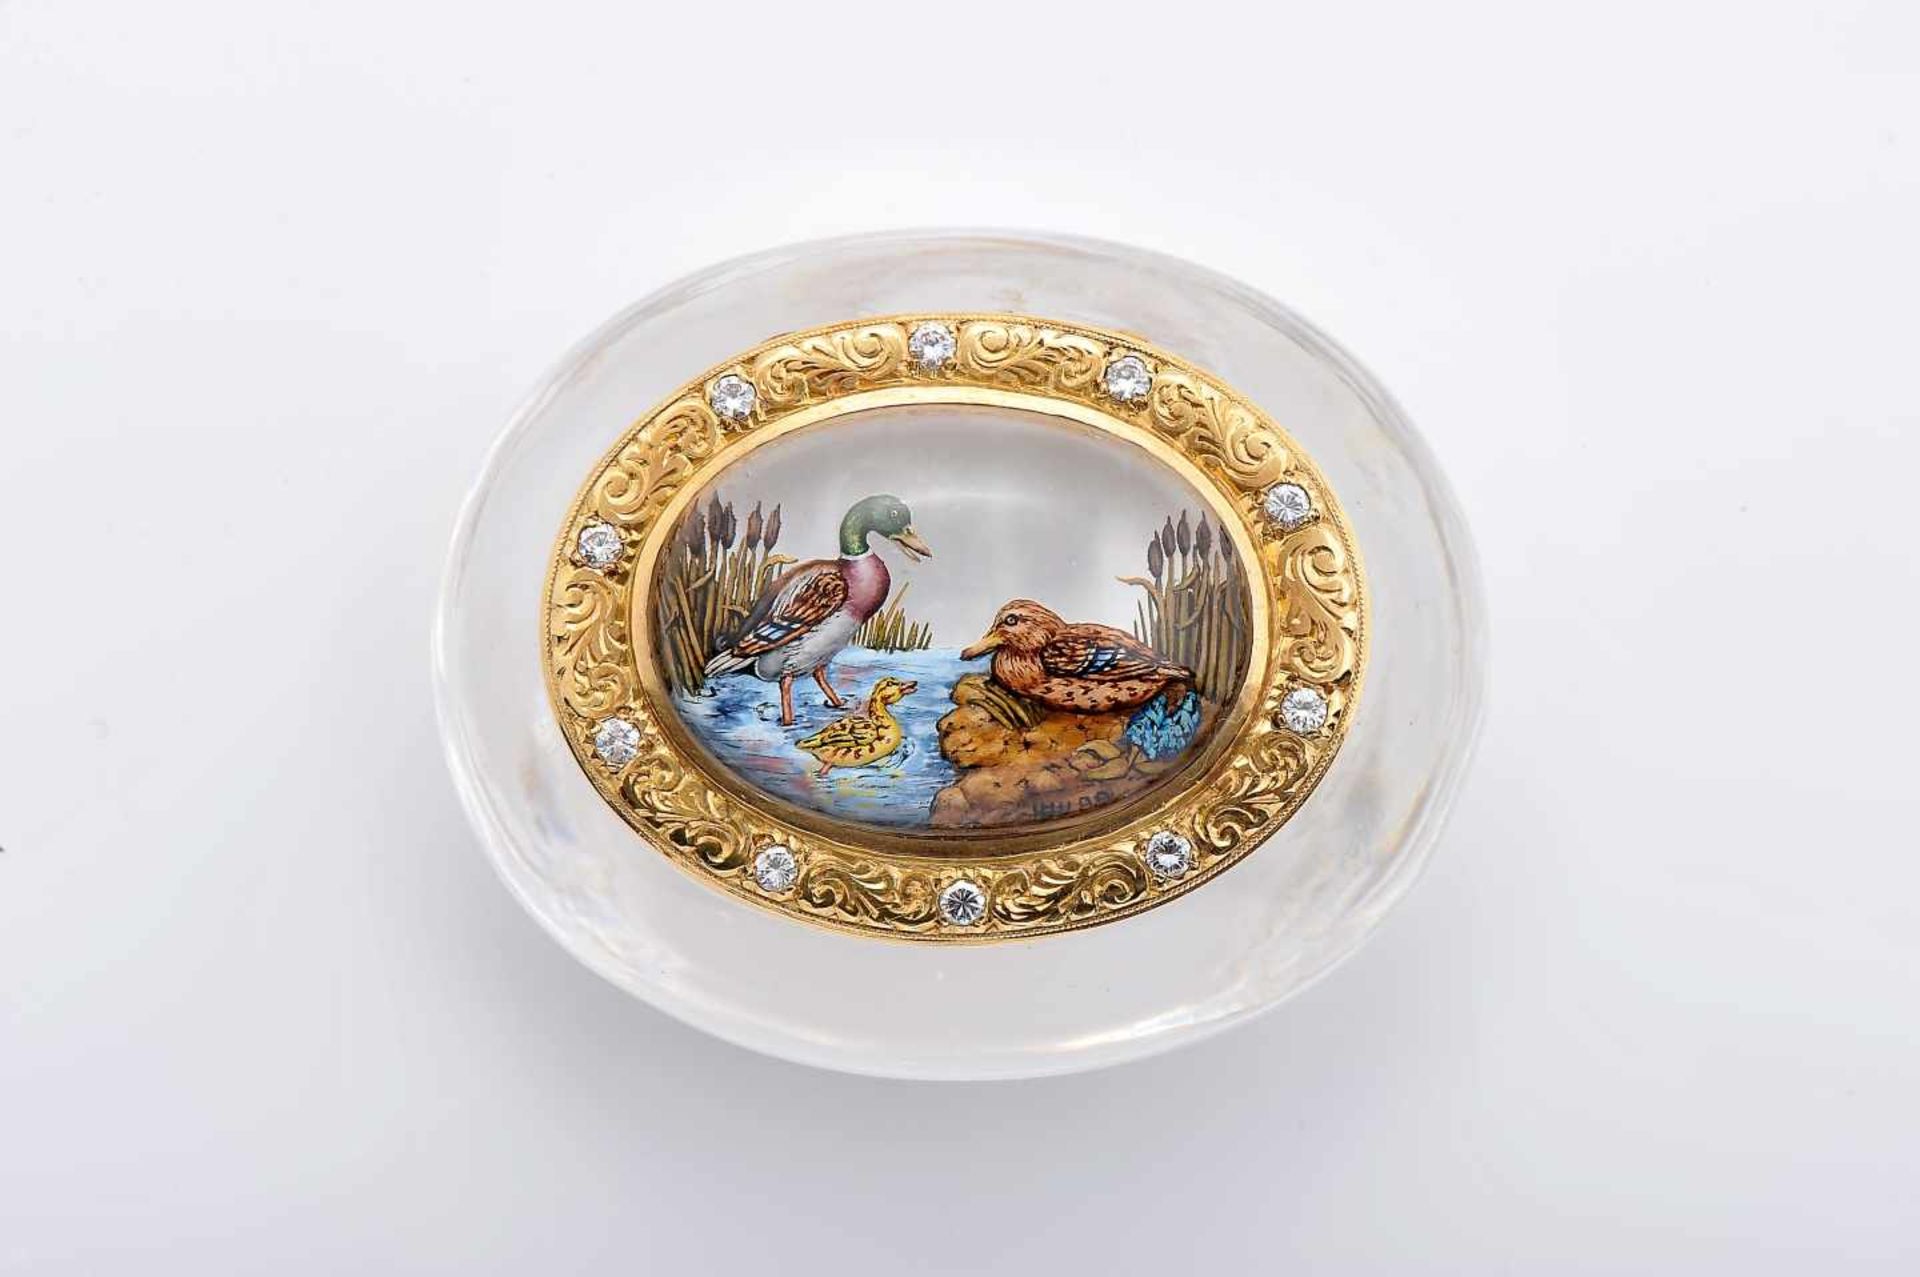 An Oval BoxAn Oval Box, rock crystal, 750/1000 gold ring and cover, application of painted rock